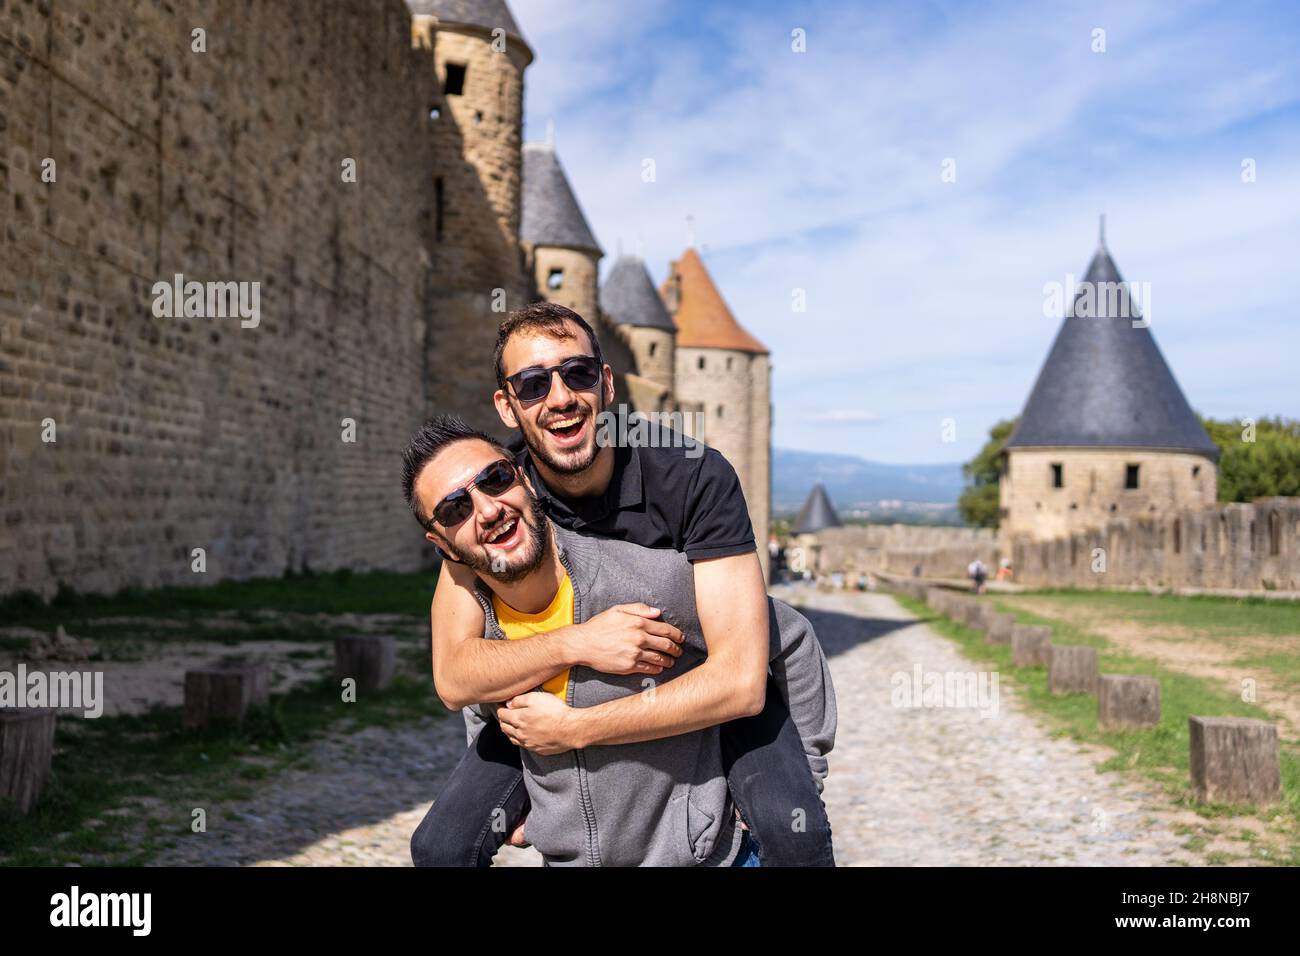 Male jumping on the back of his male couple next to a medieval wall with towers. France Stock Photo